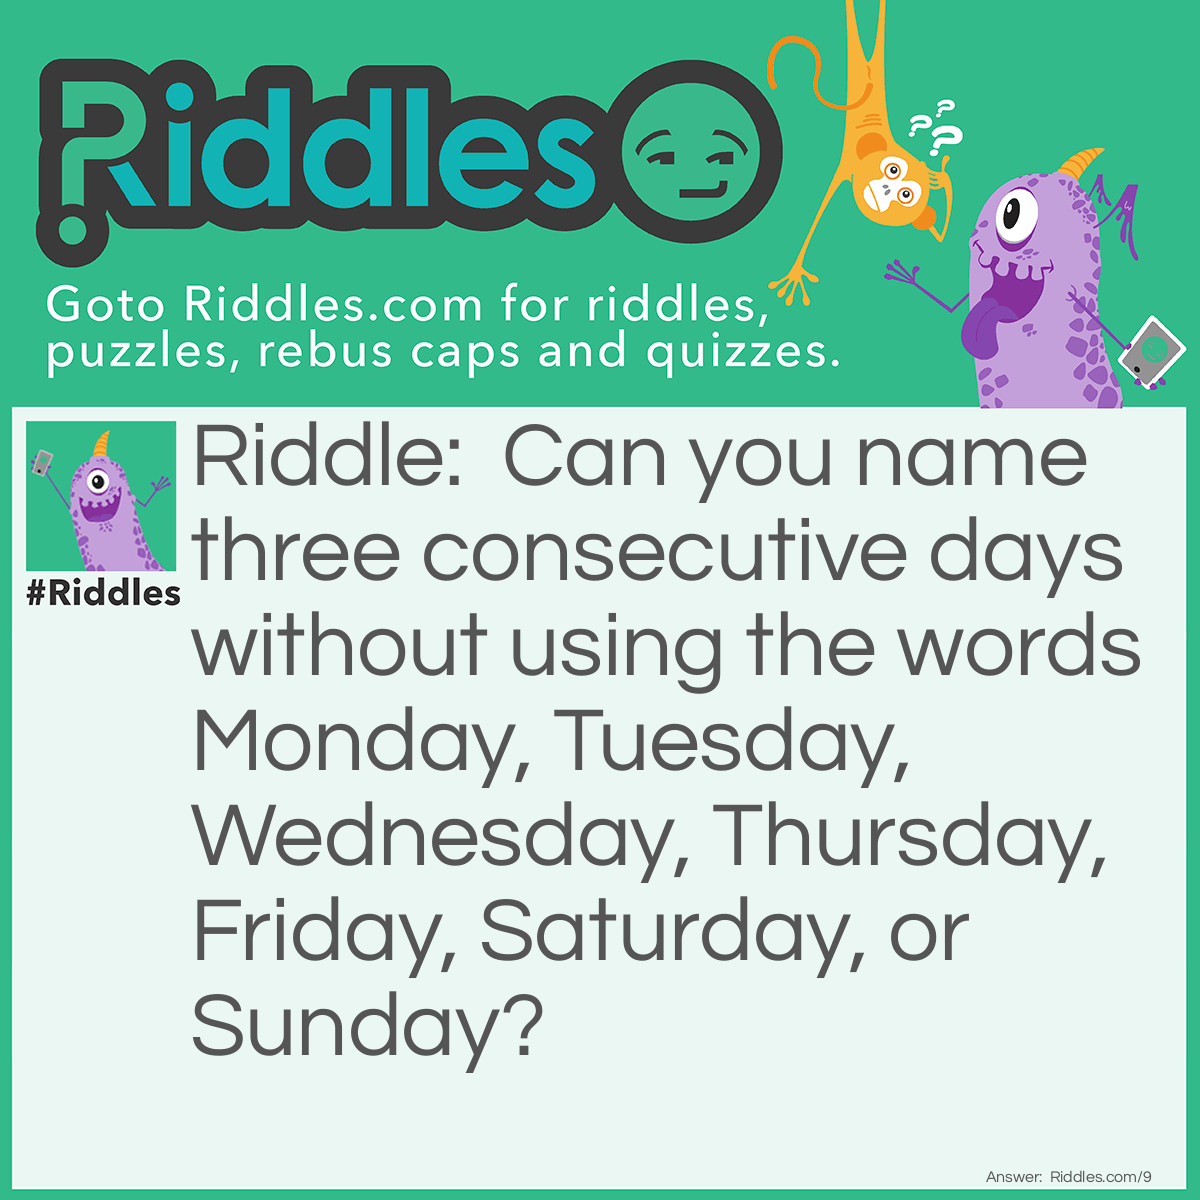 Riddle: Can you name three consecutive days without using the <a href="/quiz/words">words</a> Monday, Tuesday, Wednesday, Thursday, Friday, Saturday, or Sunday? Answer: Yesterday, Today, and Tomorrow.